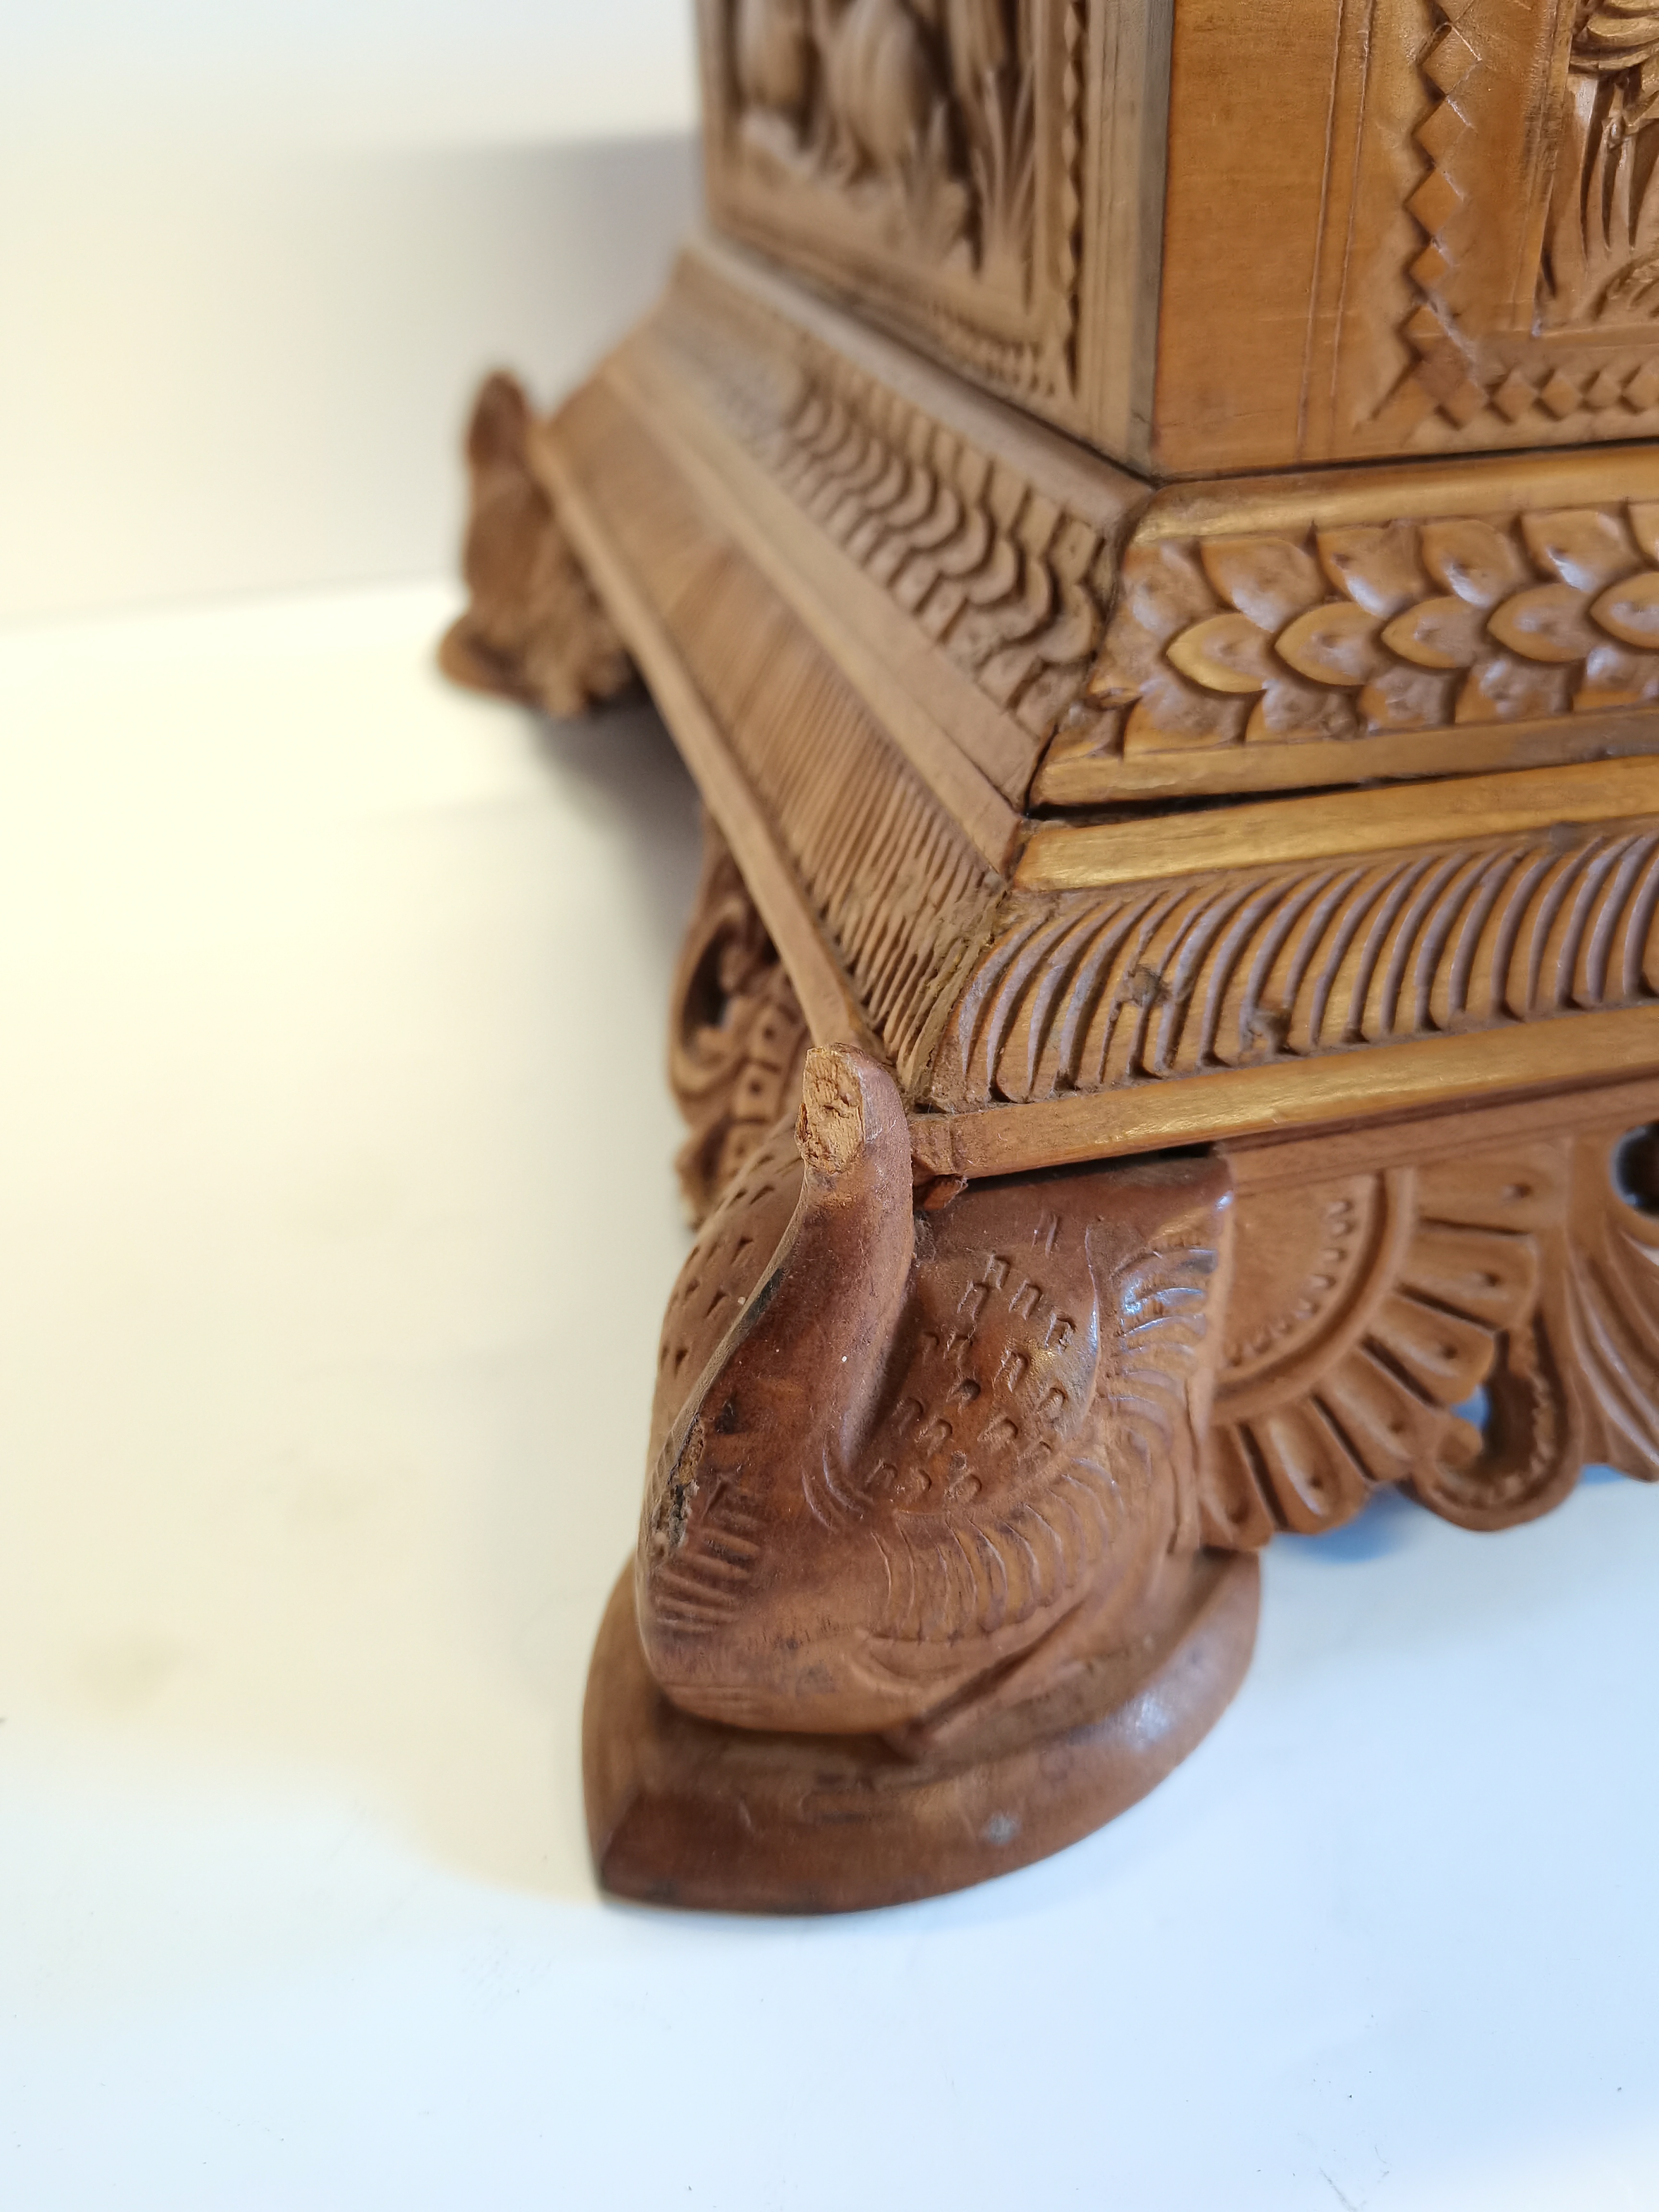 Qualty carved box with bird decoration - Image 5 of 9